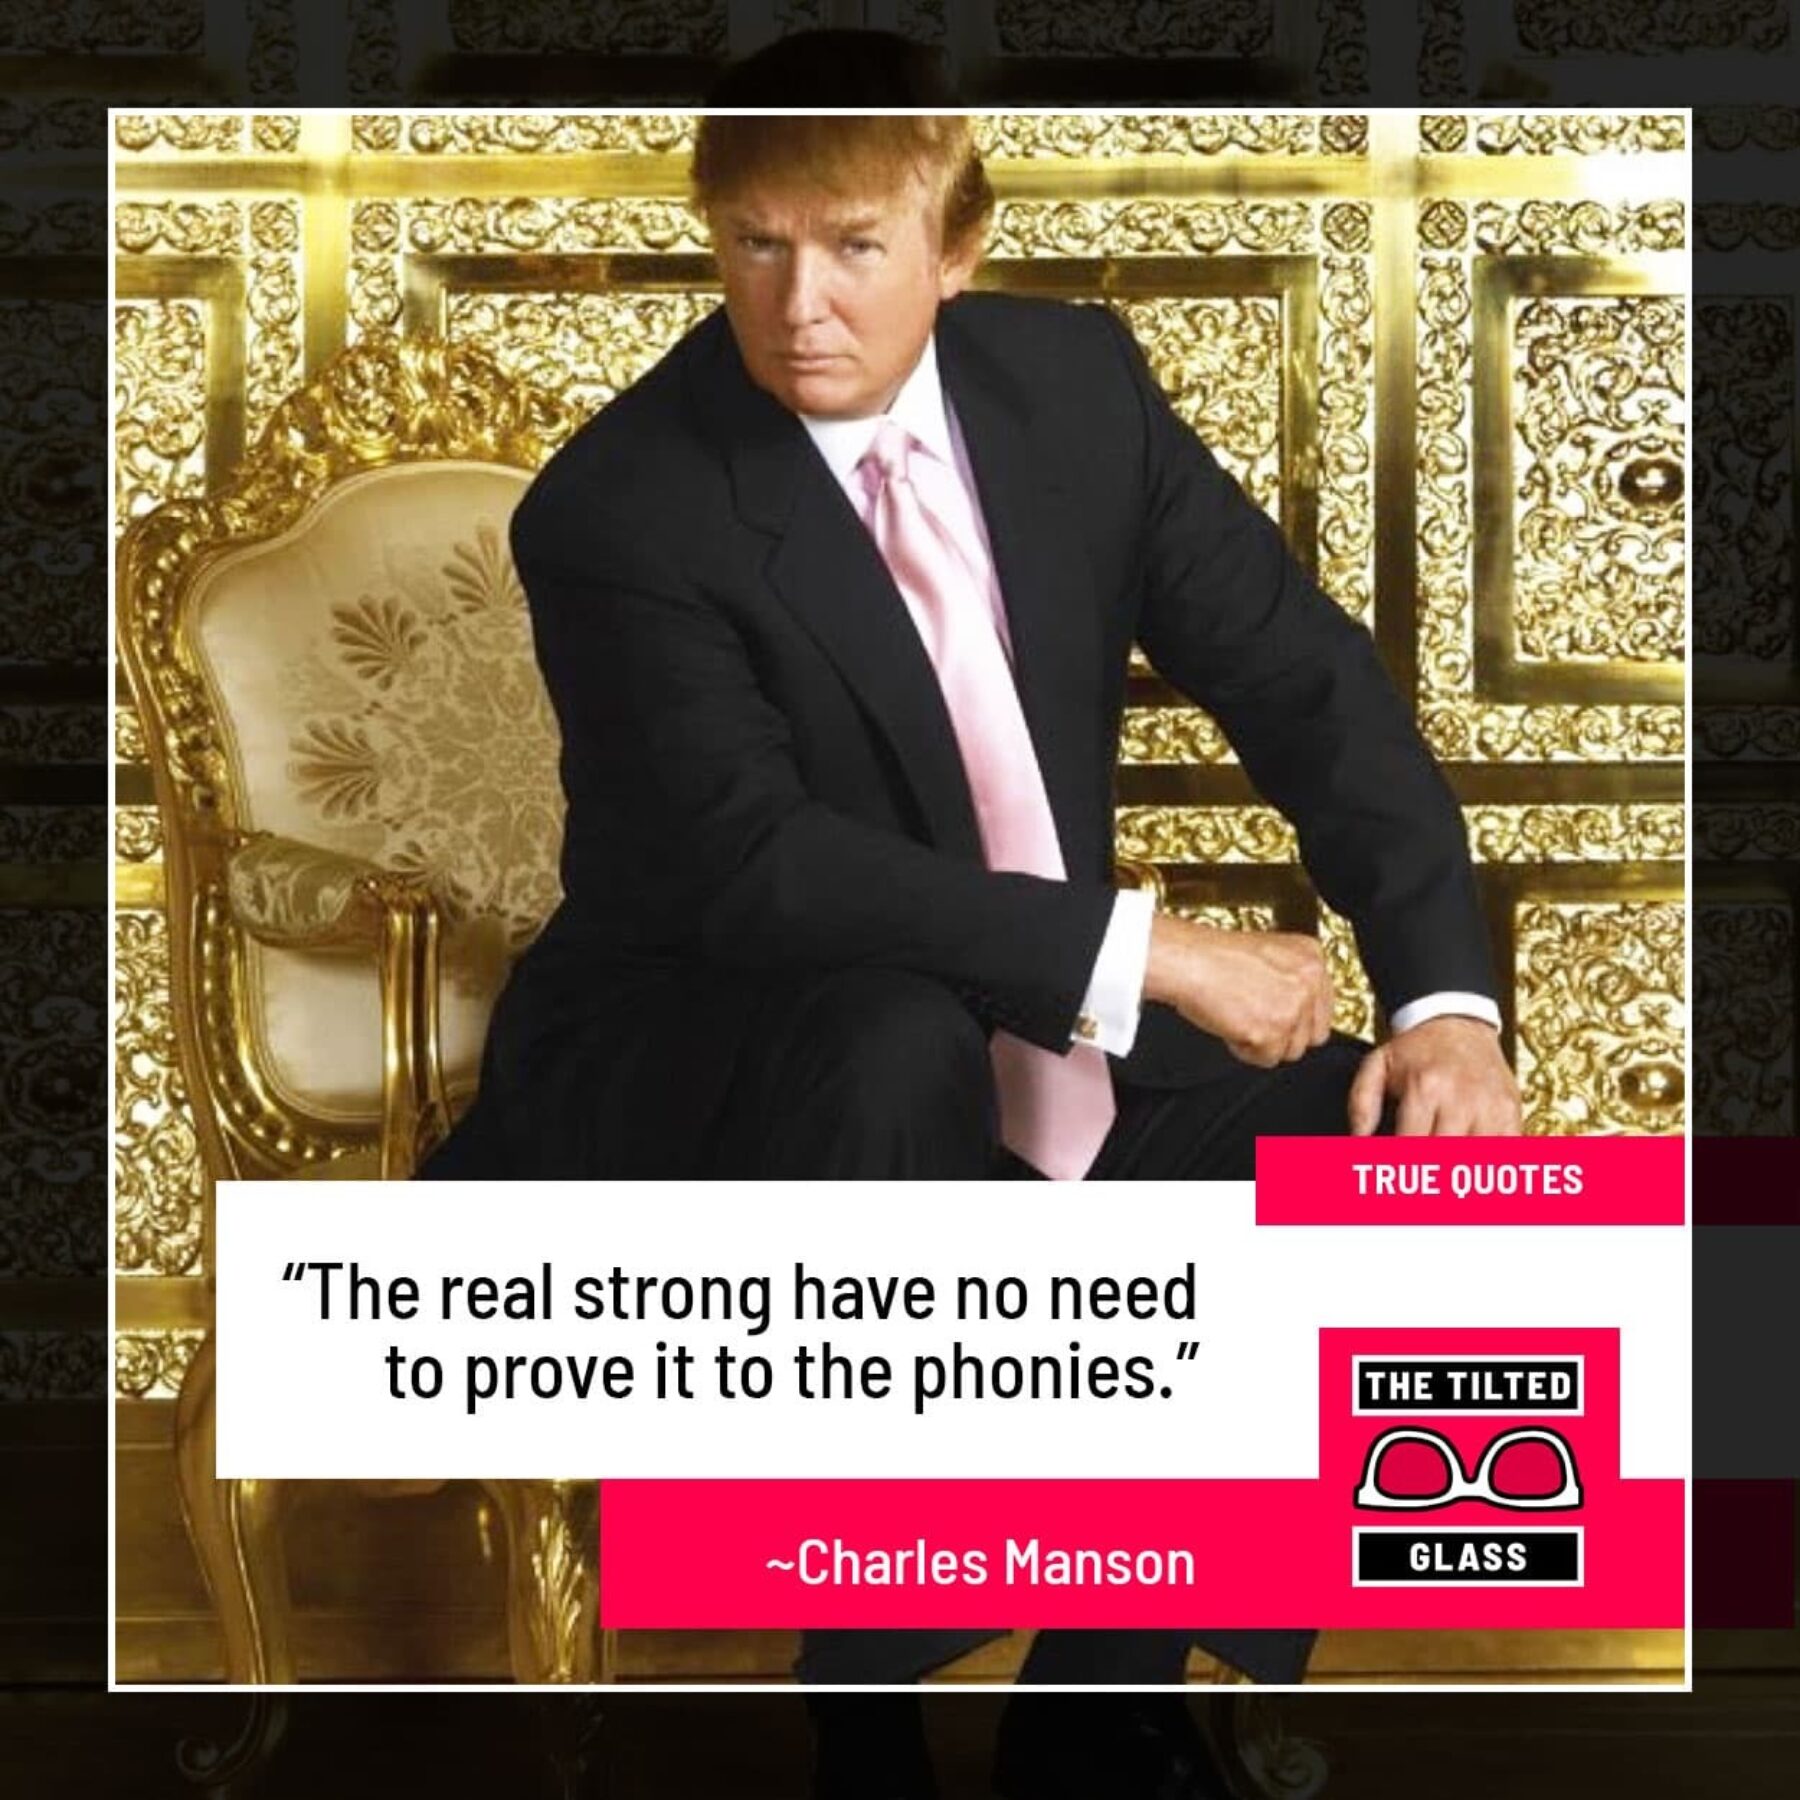 Trump: “The real strong have no need to prove it to the phonies.”